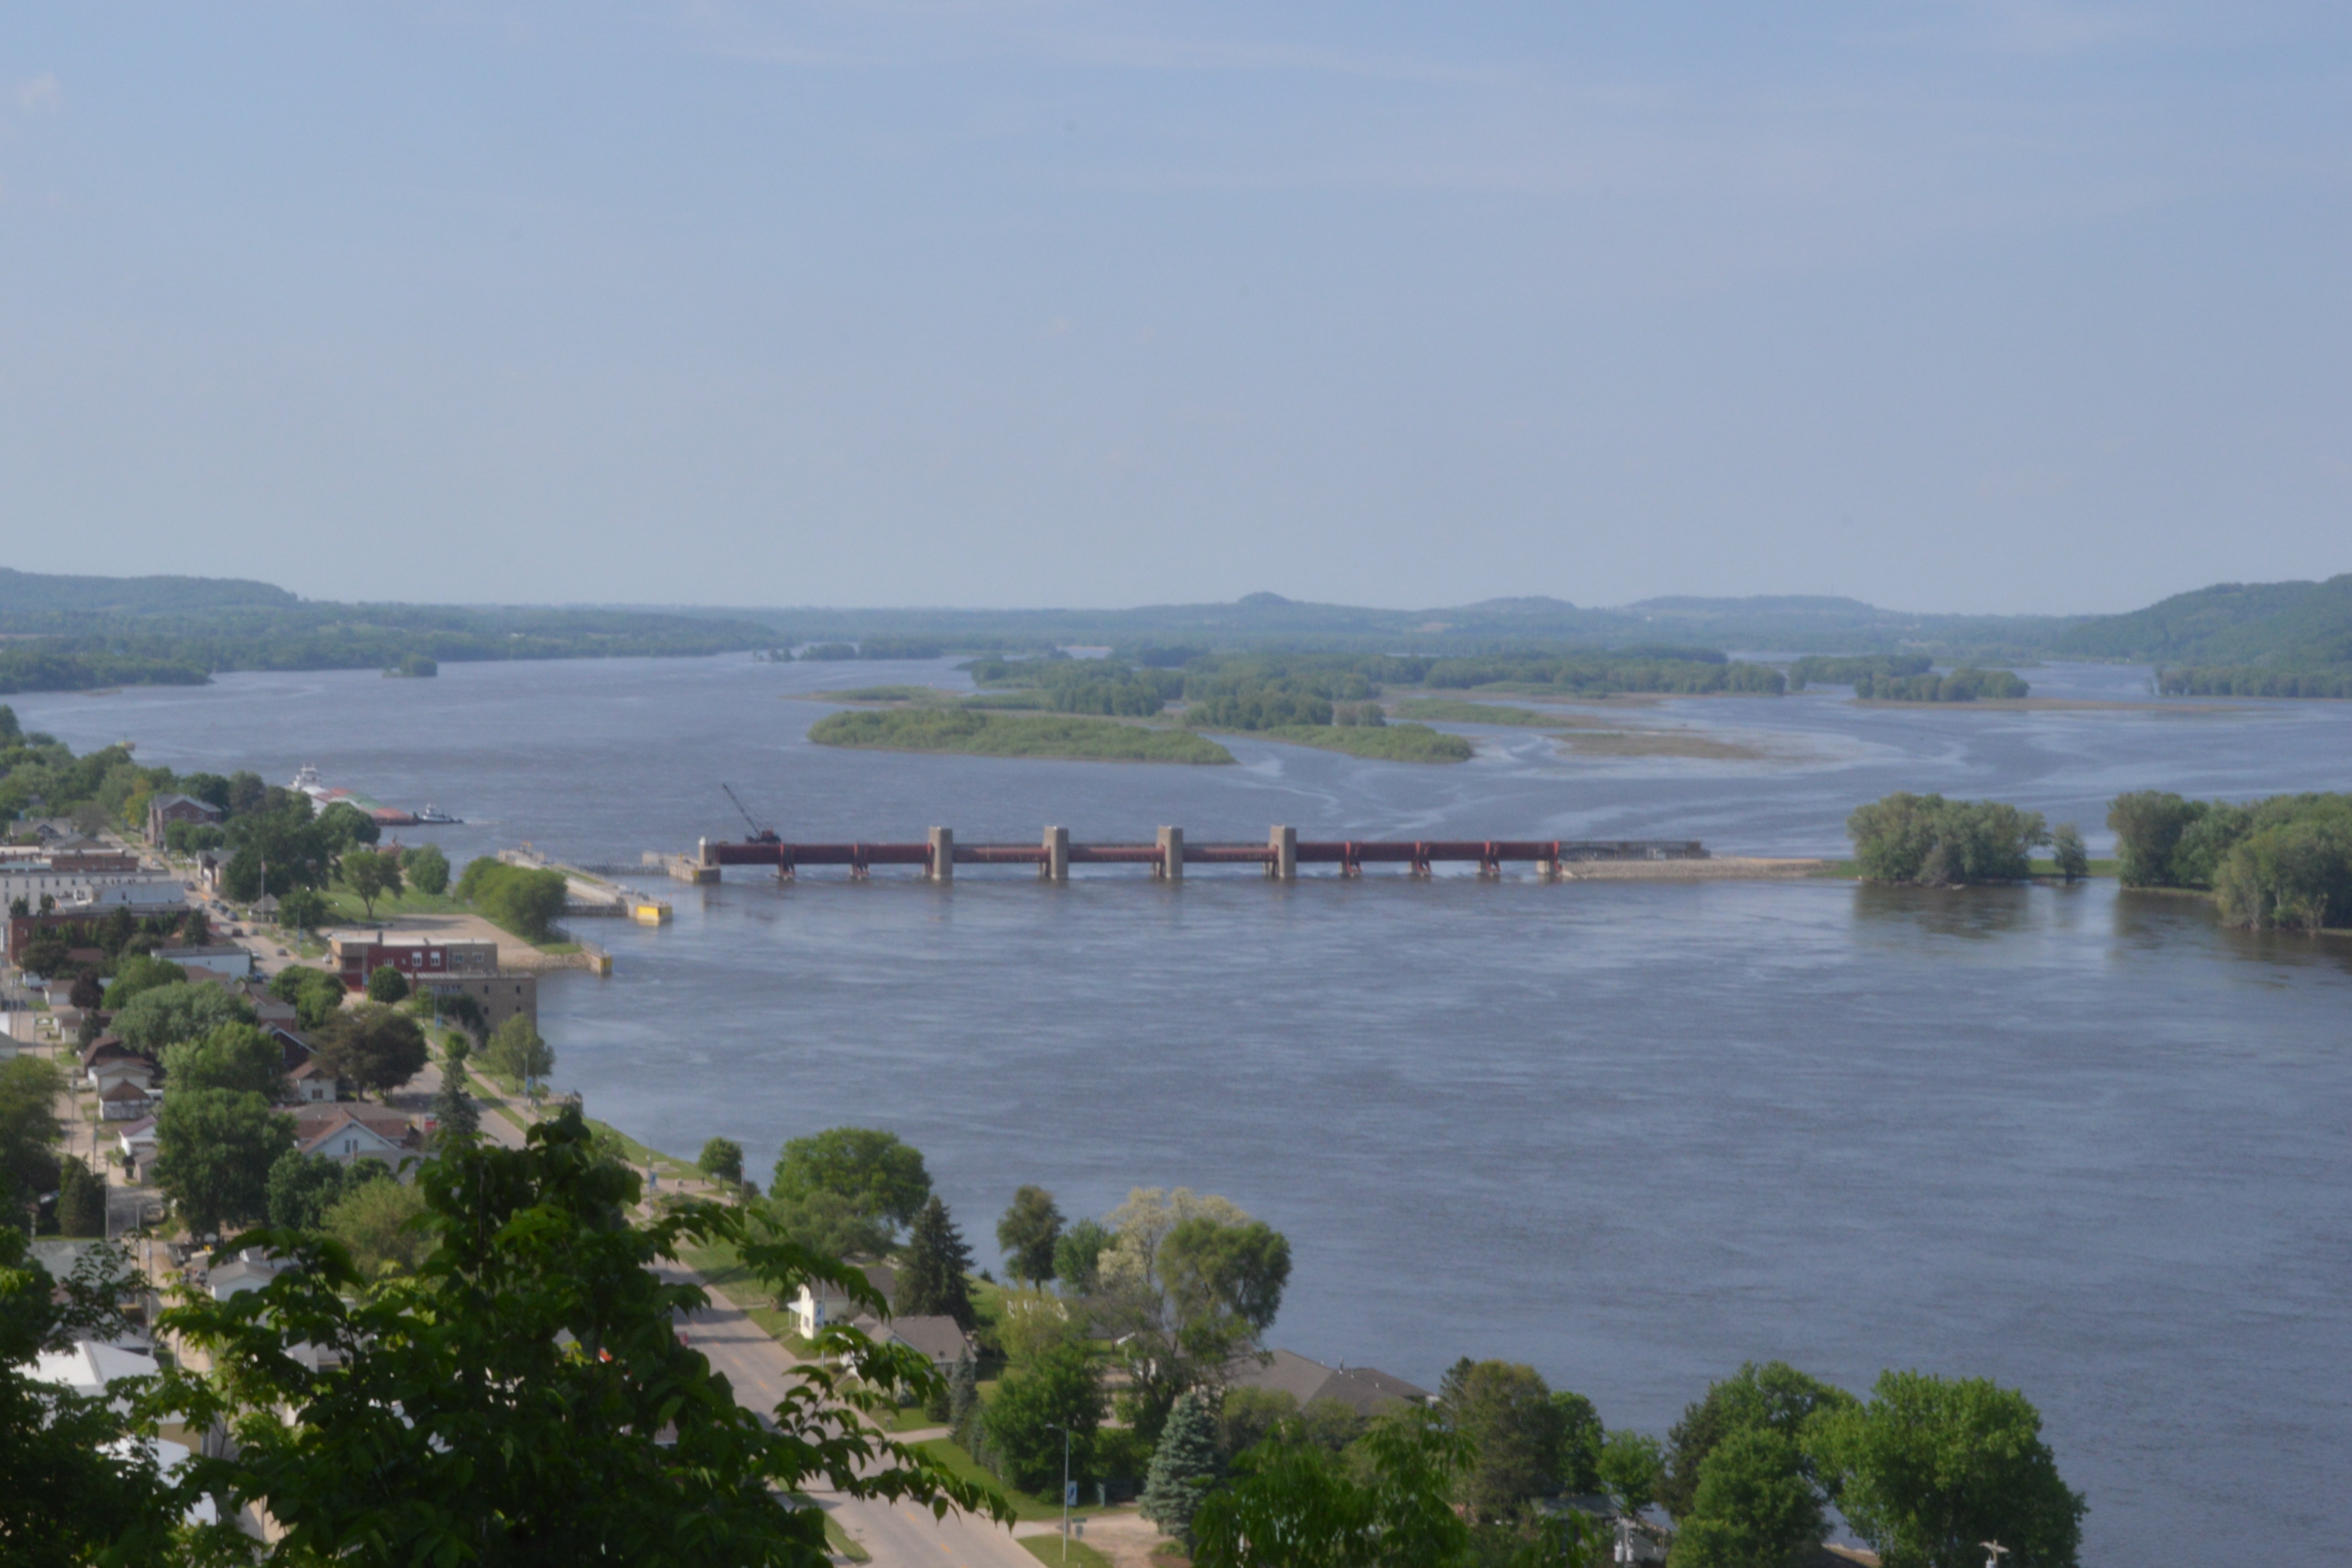 View of the Mississippi River from the trail